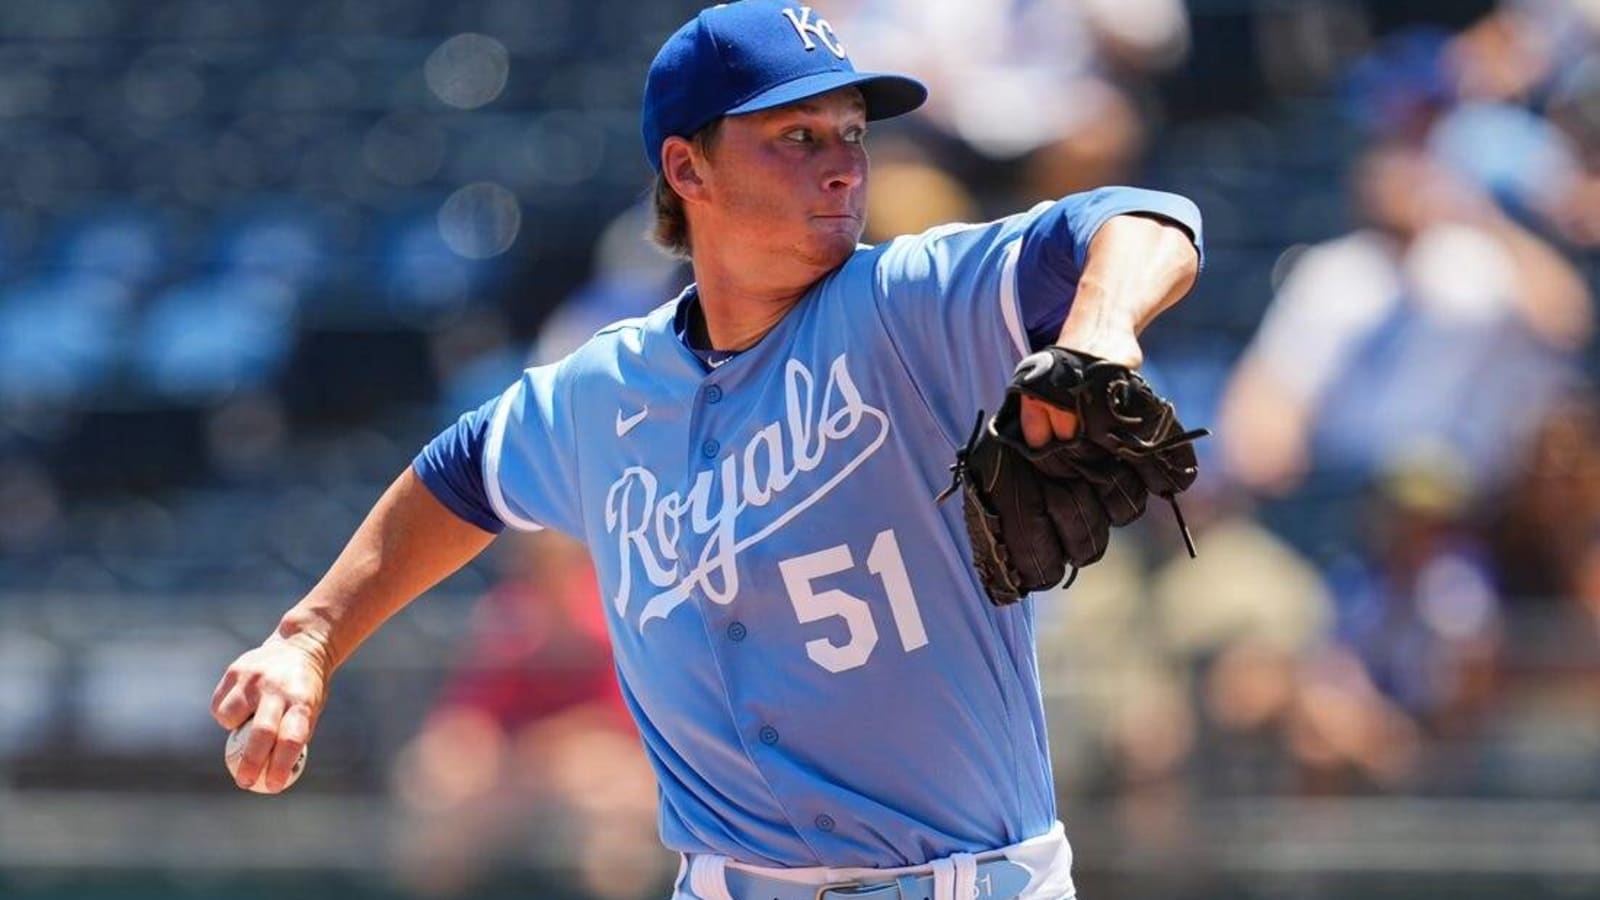 Brady Singer aims to get Royals back on track vs. Rays